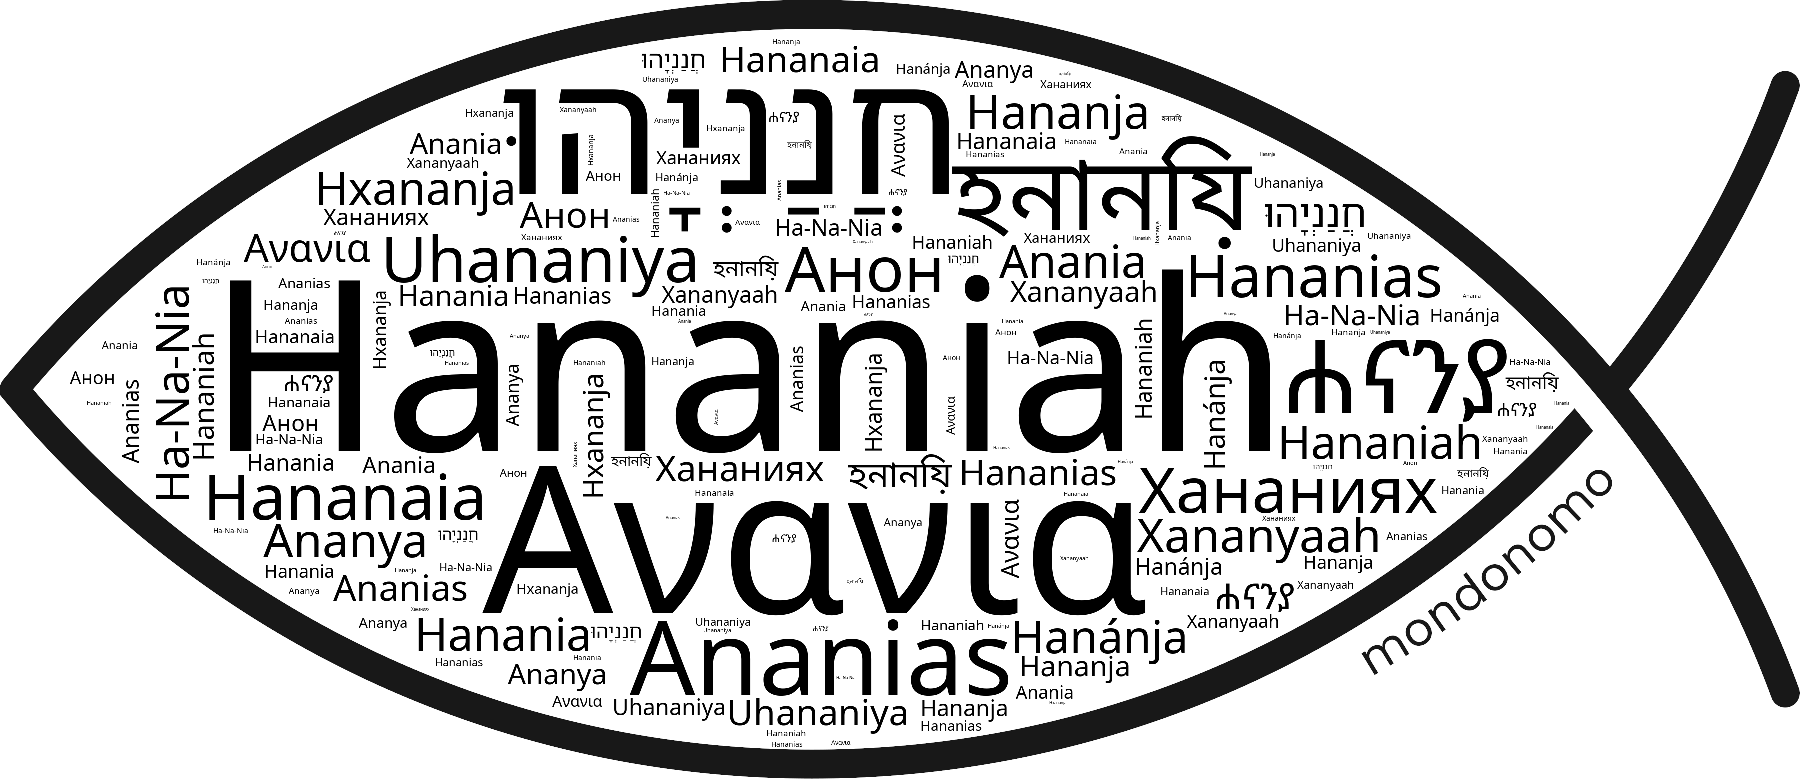 Name Hananiah in the world's Bibles